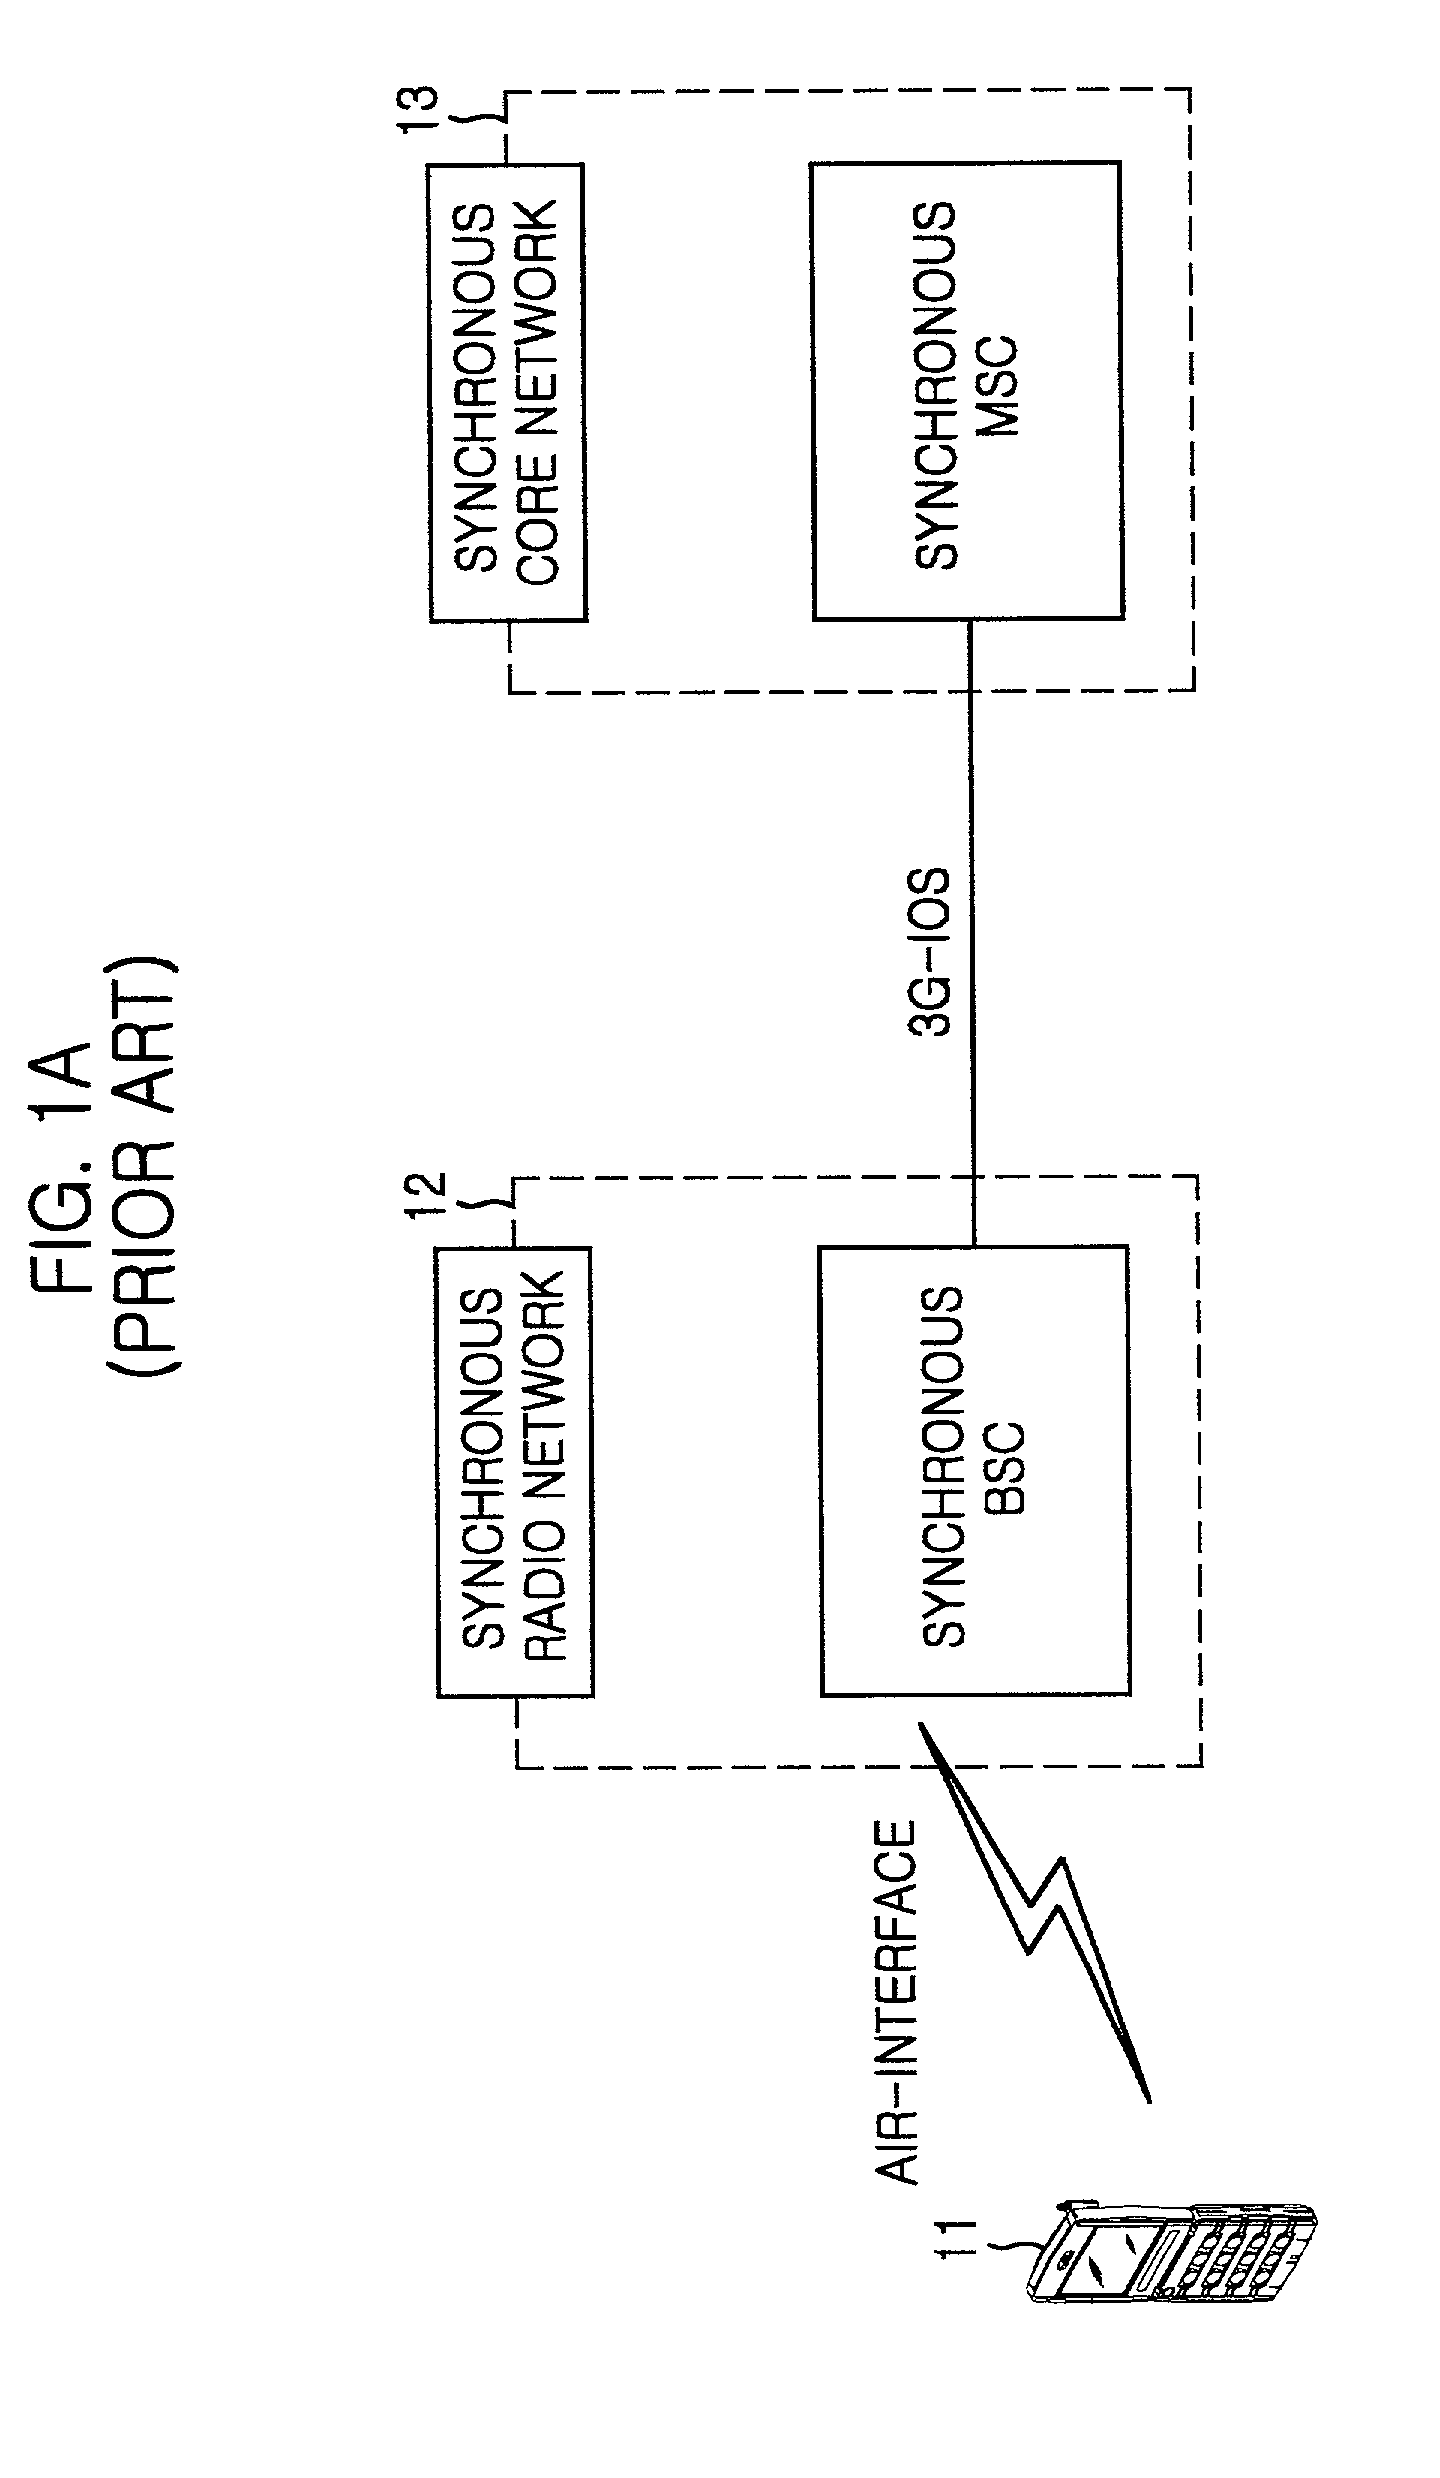 Method for transmitting long code state information in asynchronous mobile communication system